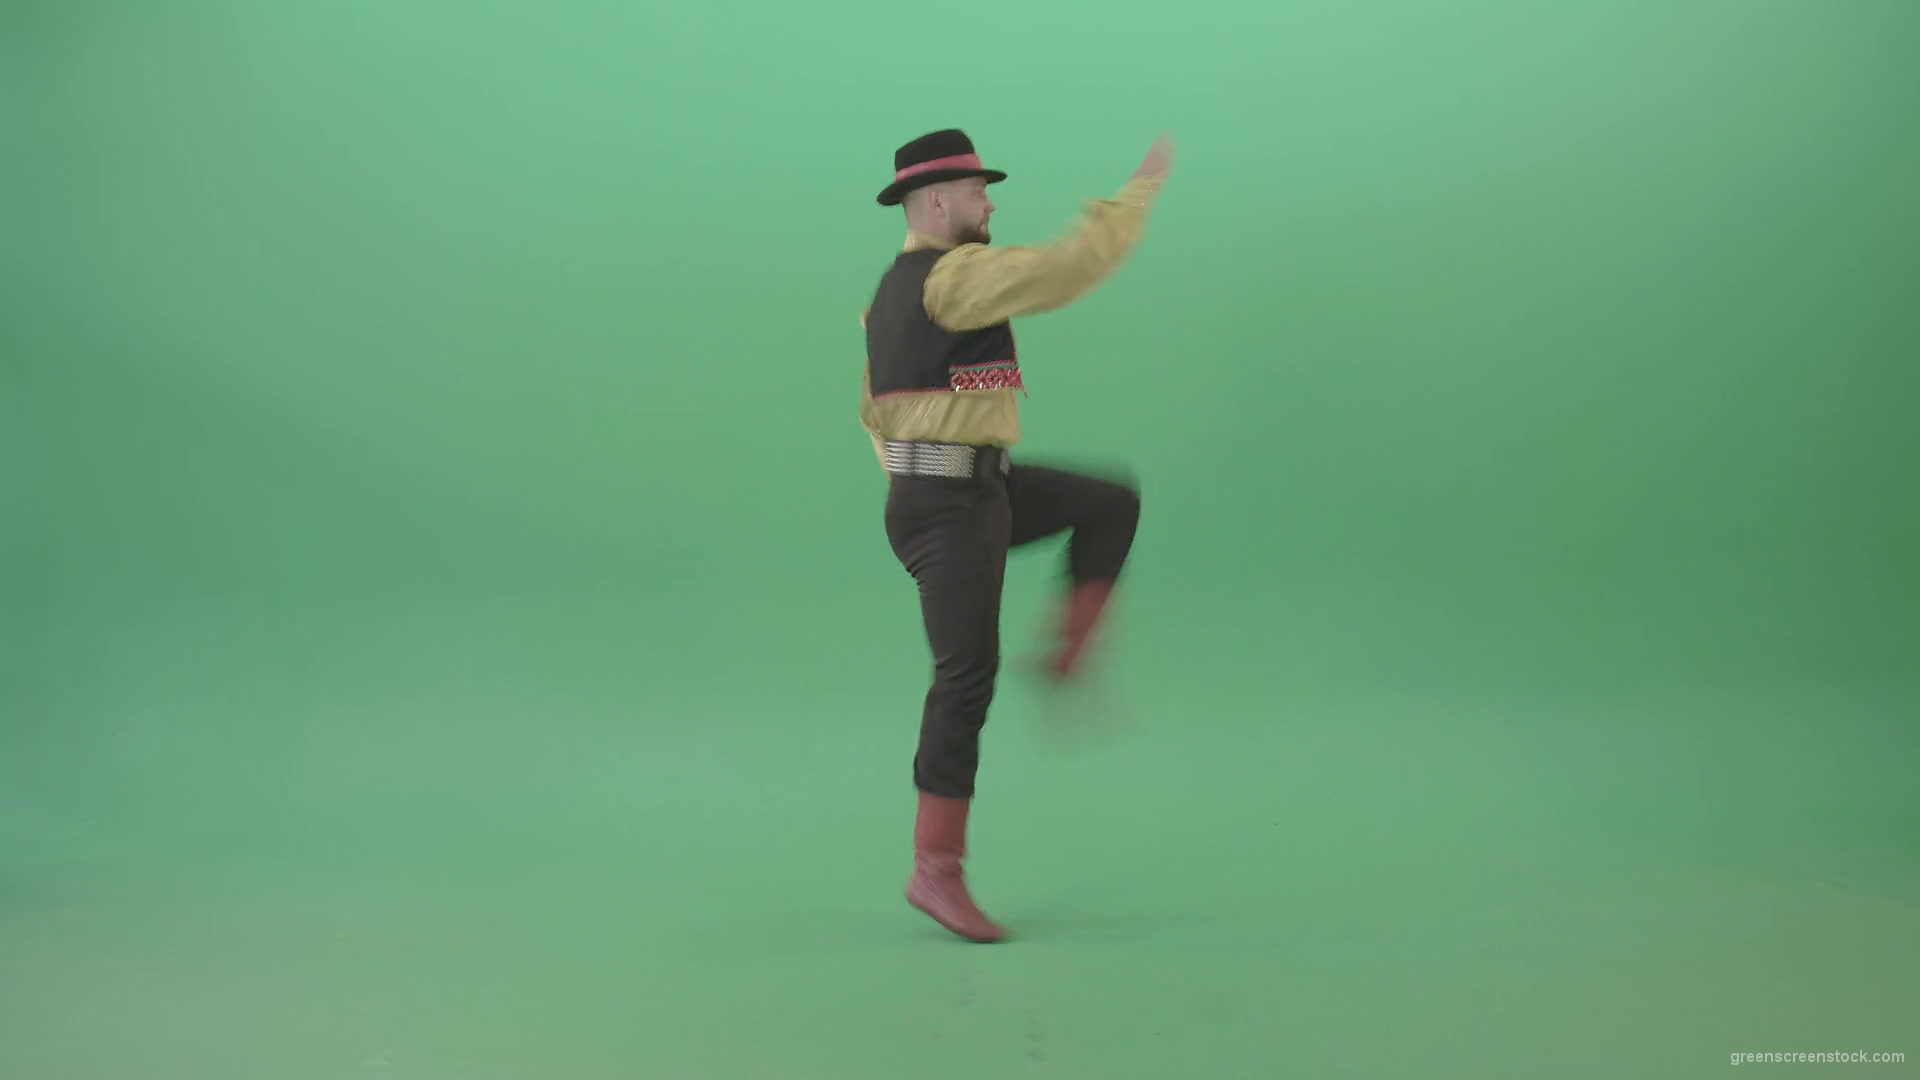 Romanian-Gypsy-Man-dancing-with-clapping-hand-with-side-view-isolated-4K-Green-Screen-Video-Footage-1920_004 Green Screen Stock